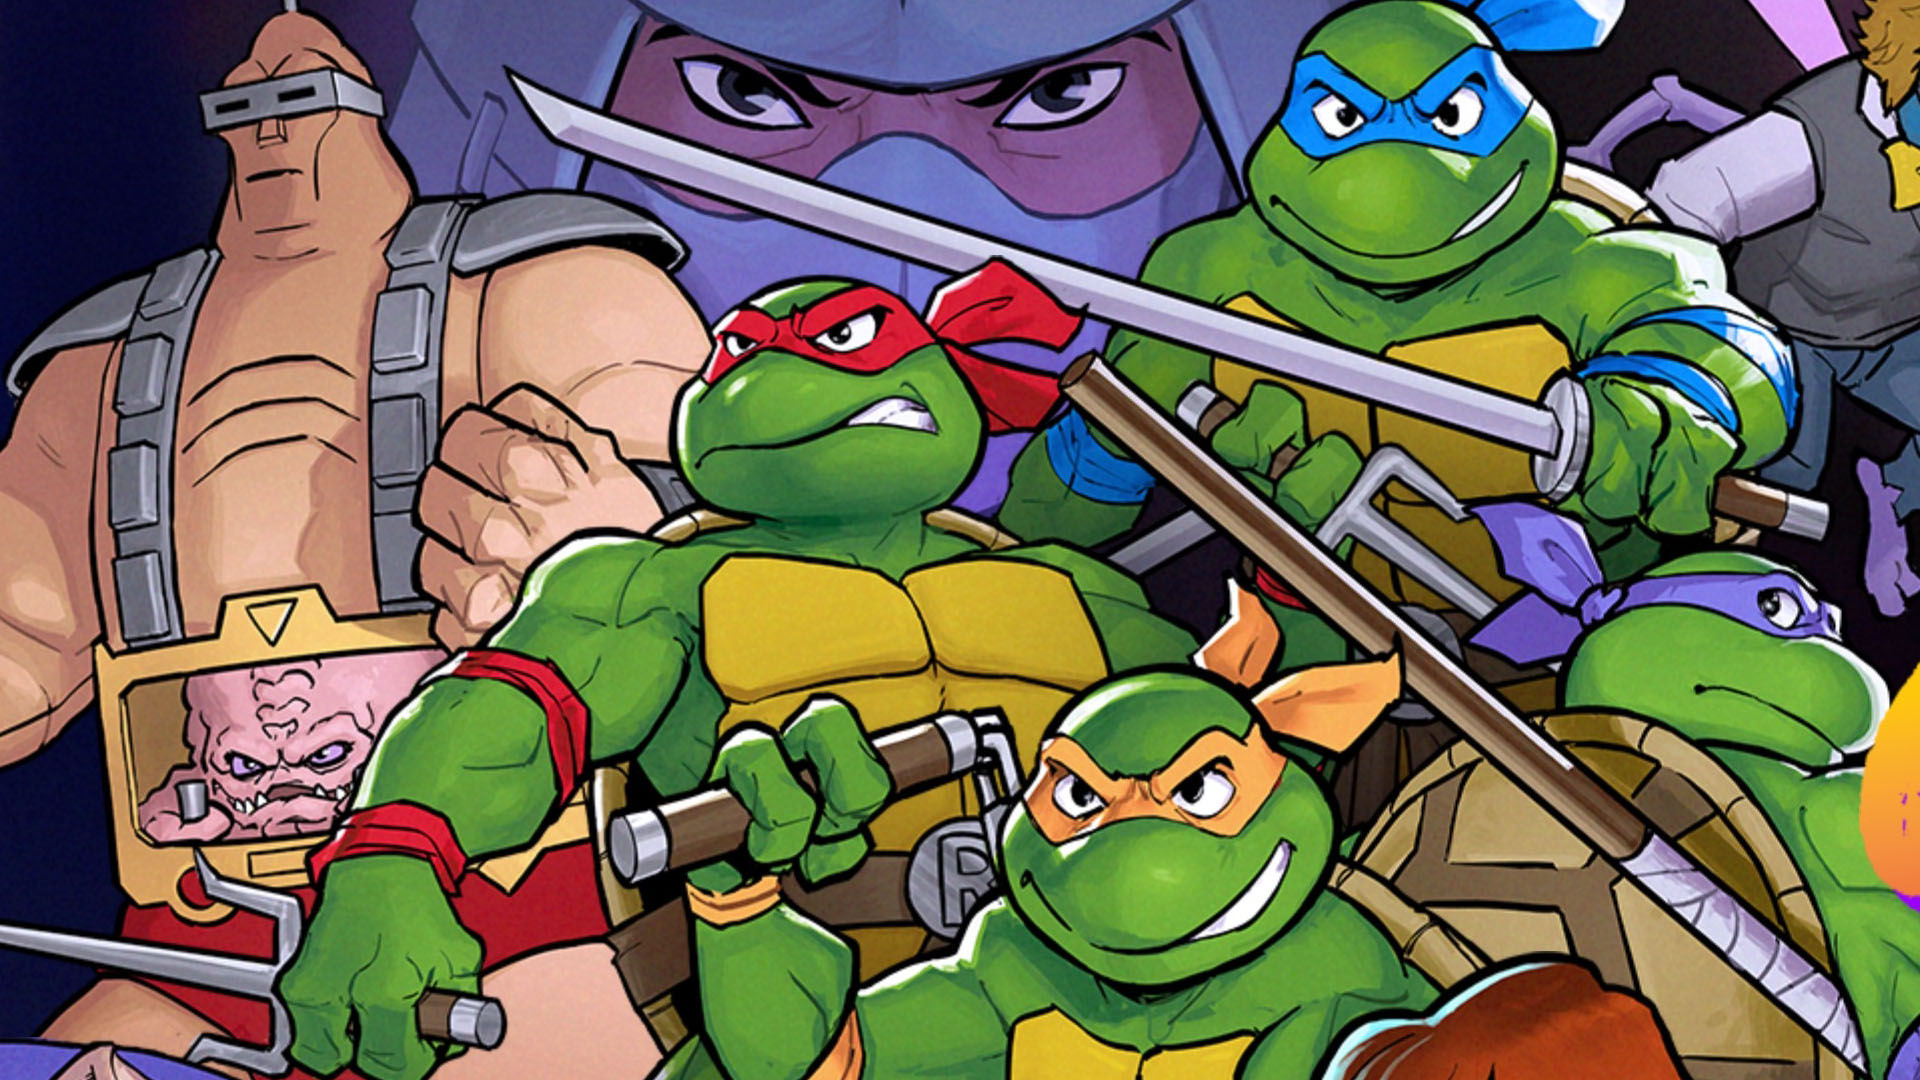 “Never Say Never” on 2000s TMNT games getting re-released, says Konami